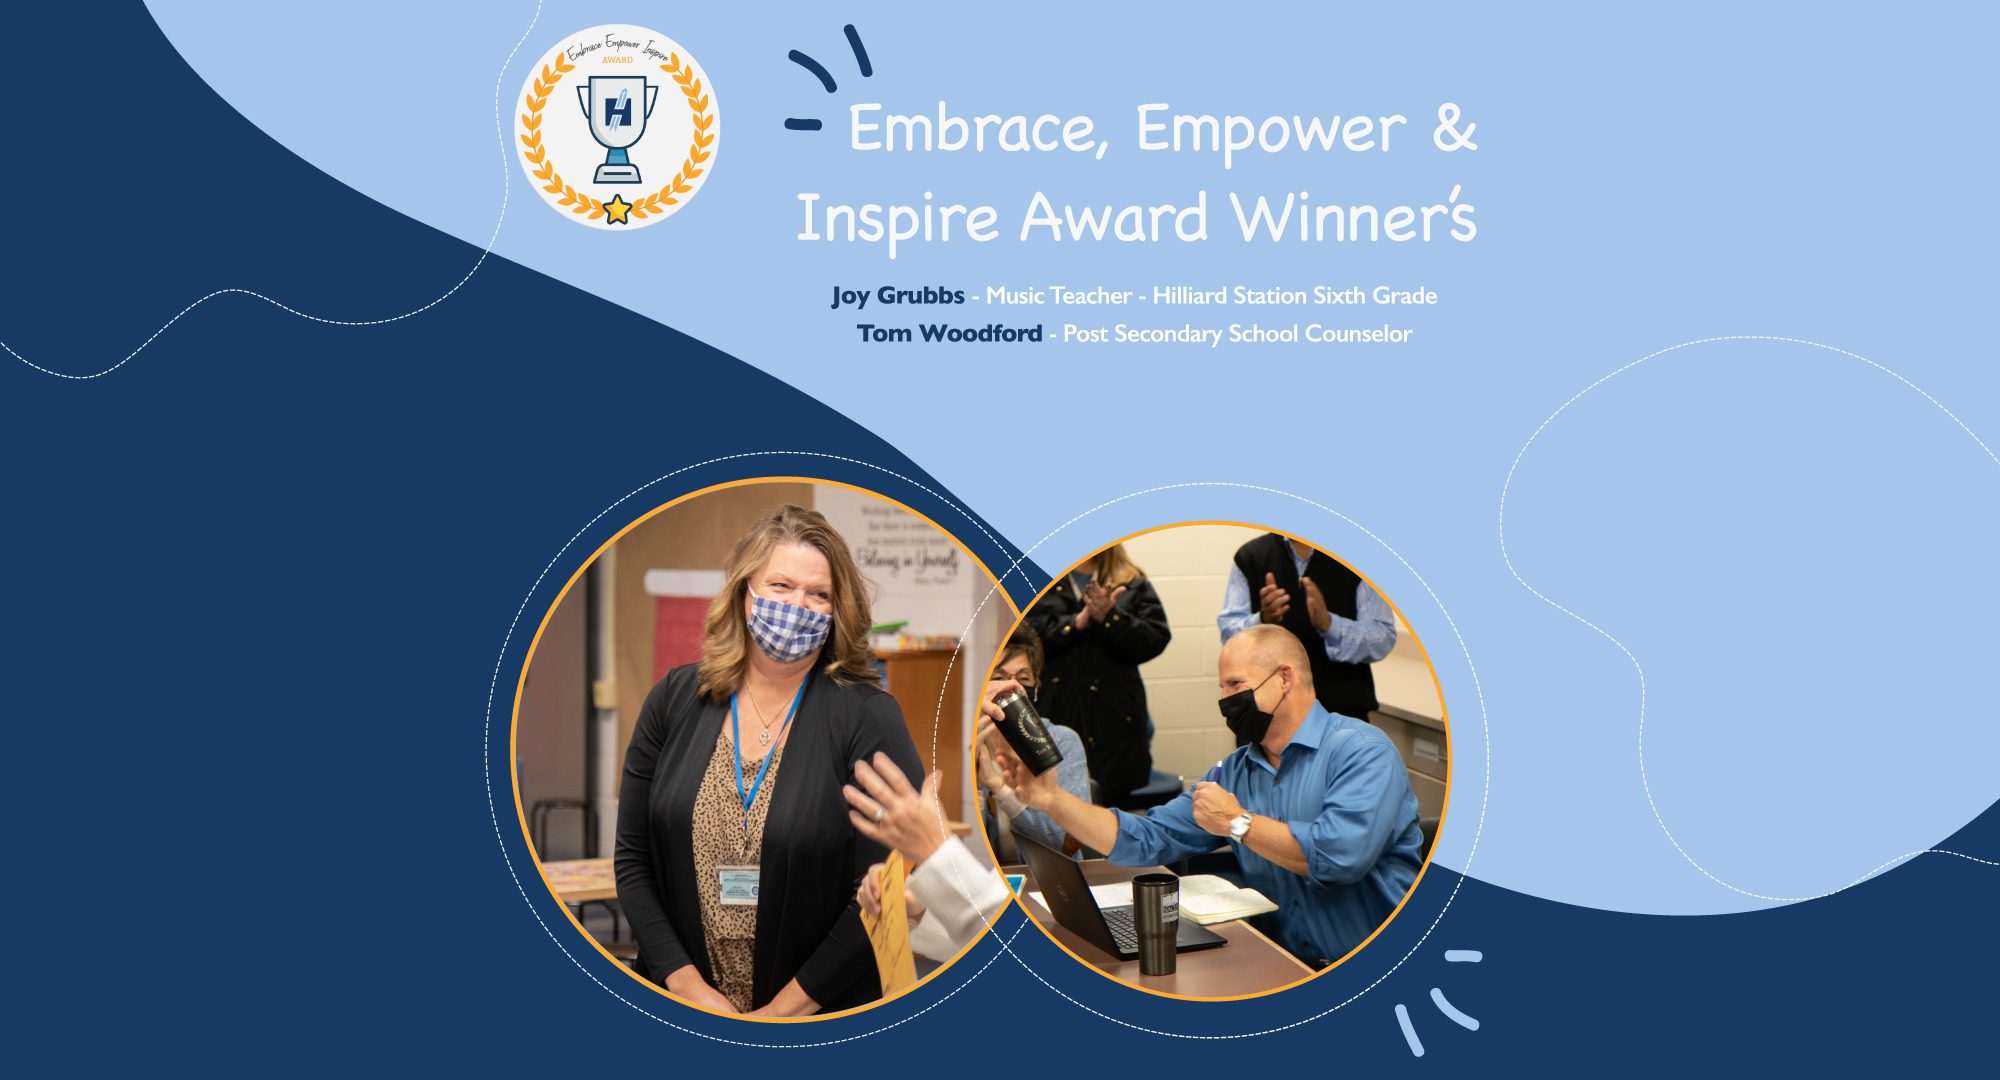 December Winners of the Embrace, Empower & Inspire Award